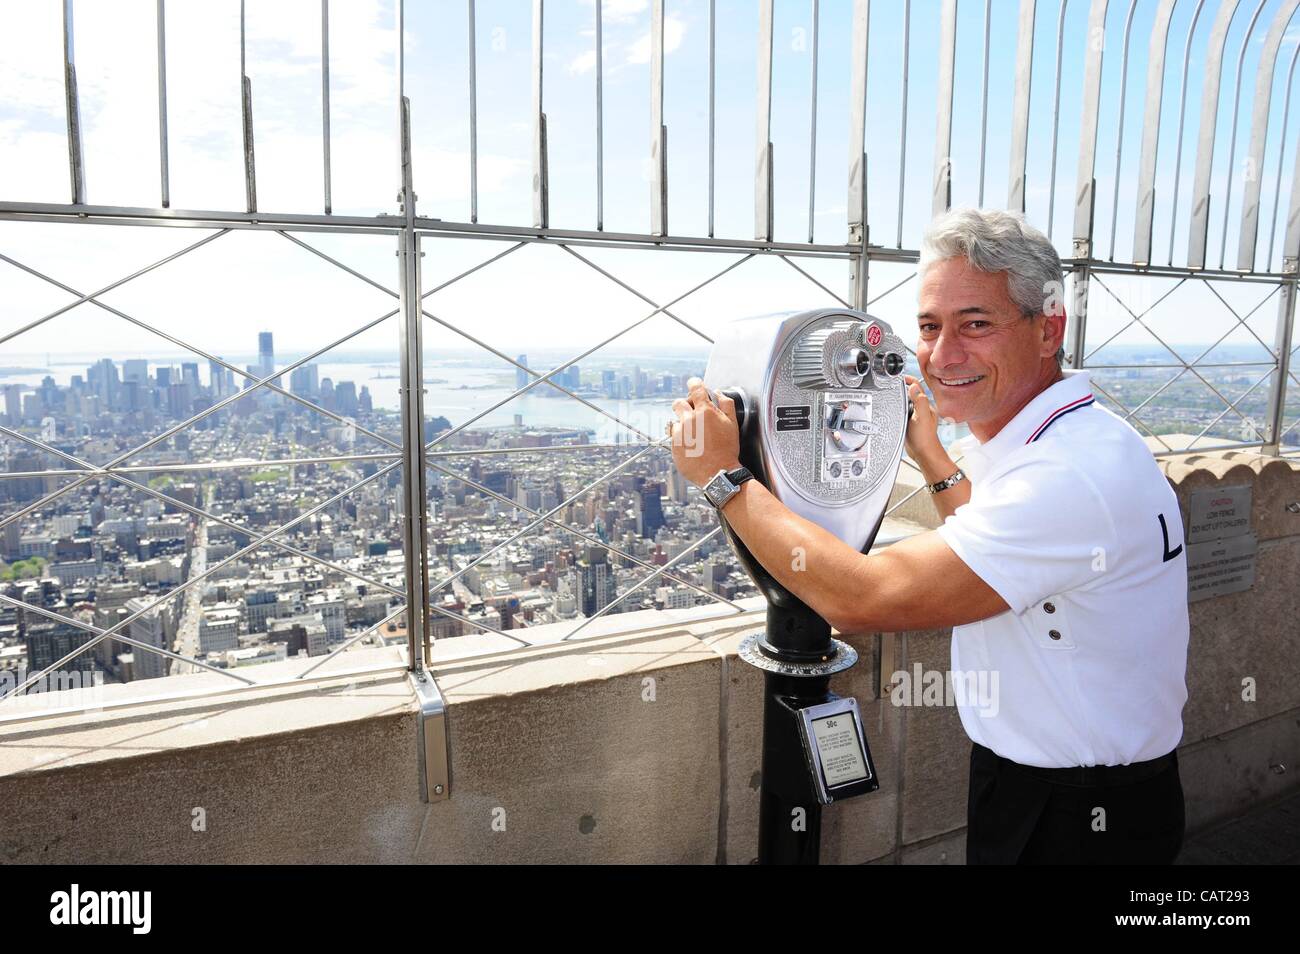 April 17, 2012 - Manhattan, New York, U.S. - GREG LOUGANIS, four-time gold medal winning diver (Los Angeles 1984, Seoul 1988) lights the Empire State Building red/white/blue to mark 100 days to the start of the London 2012 Olympic Games. (Credit Image: © Bryan Smith/ZUMAPRESS.com) Stock Photo